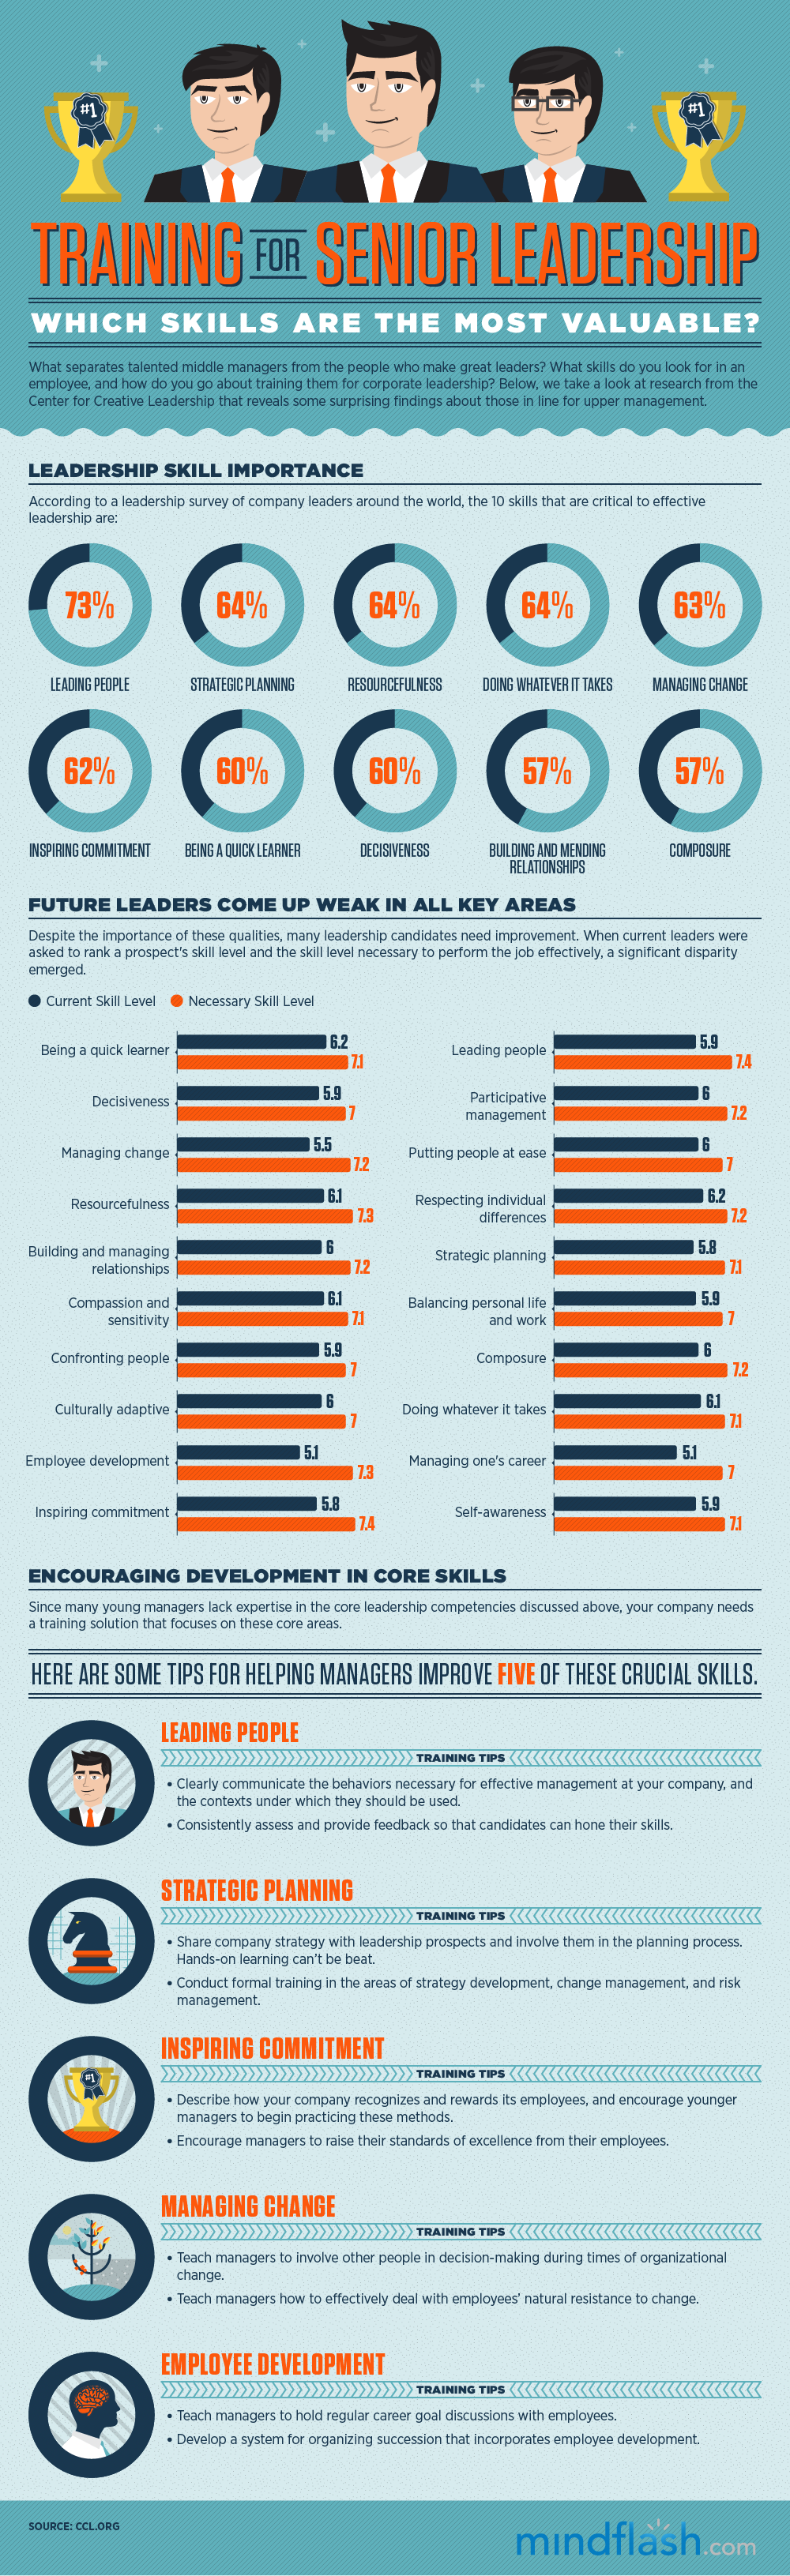 Infographic: Which skills are most valuable when training for upper management?